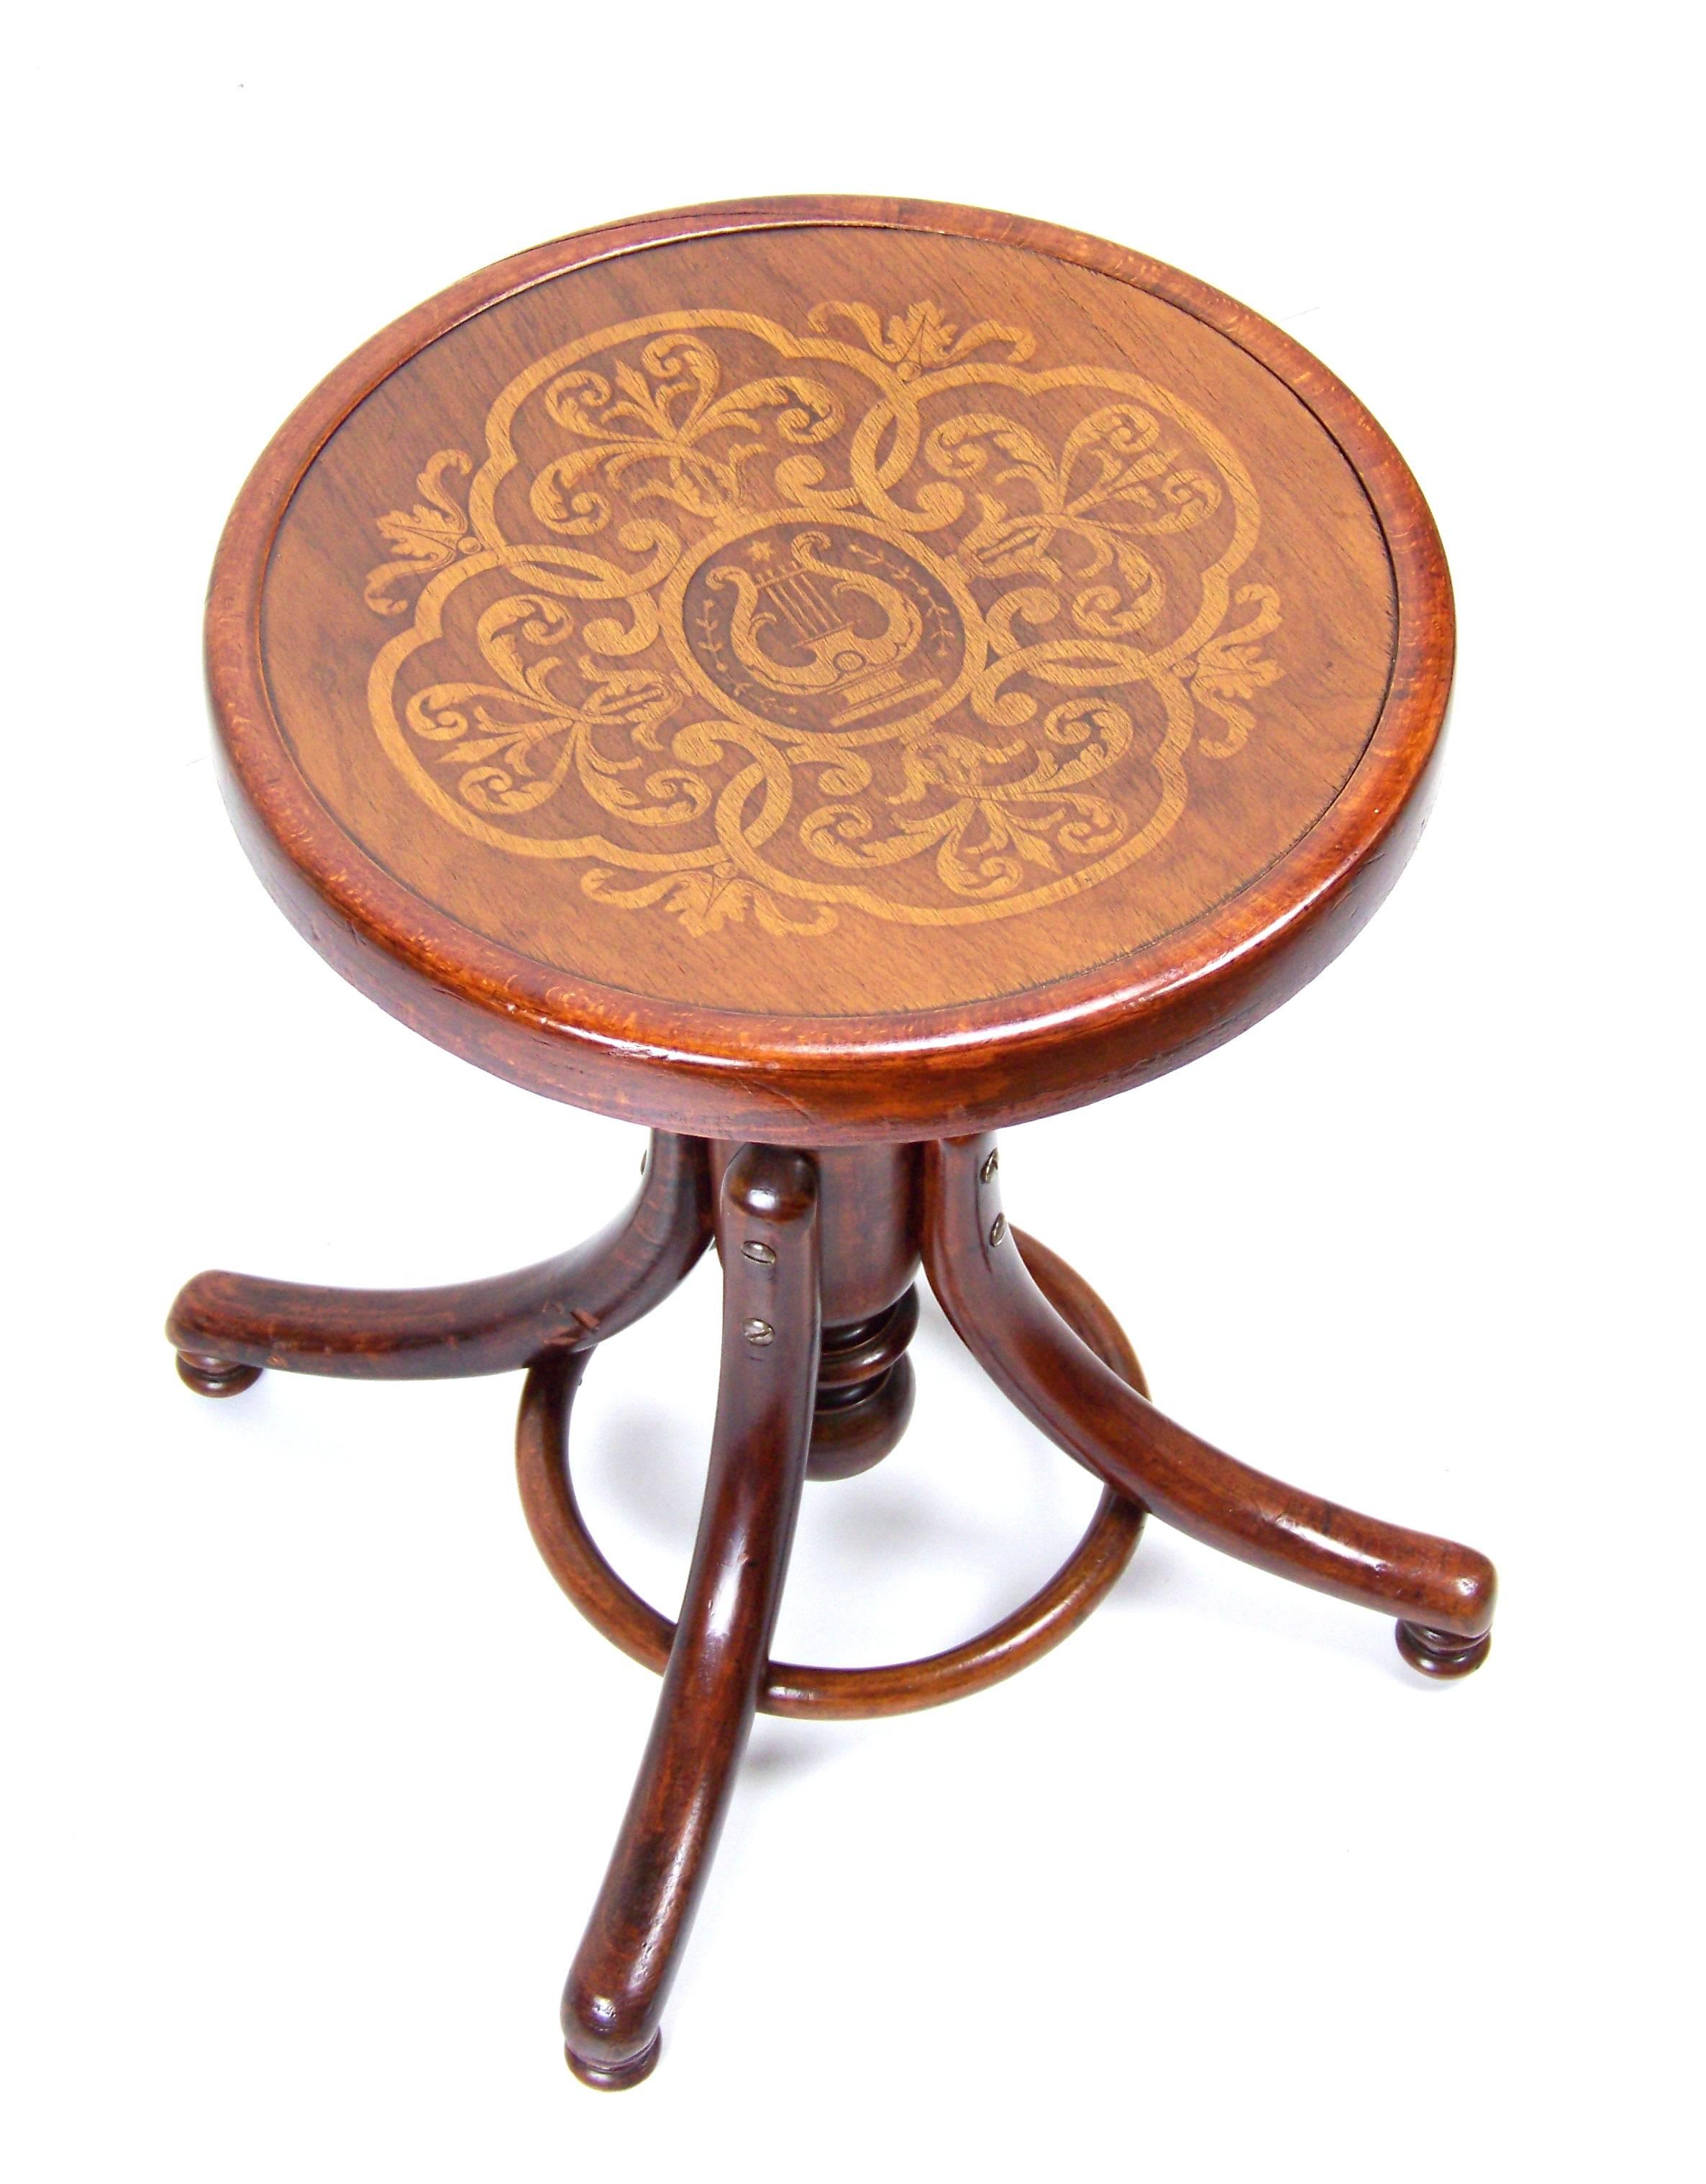 Height adjustable rotating tabouret. The height of the seat is adjustable from 47 to 58 cm. Luxury design - Massively constructed base, decorative bottom legs, cast iron elements are plated with brass, the screws are copper-plated. The seat is with